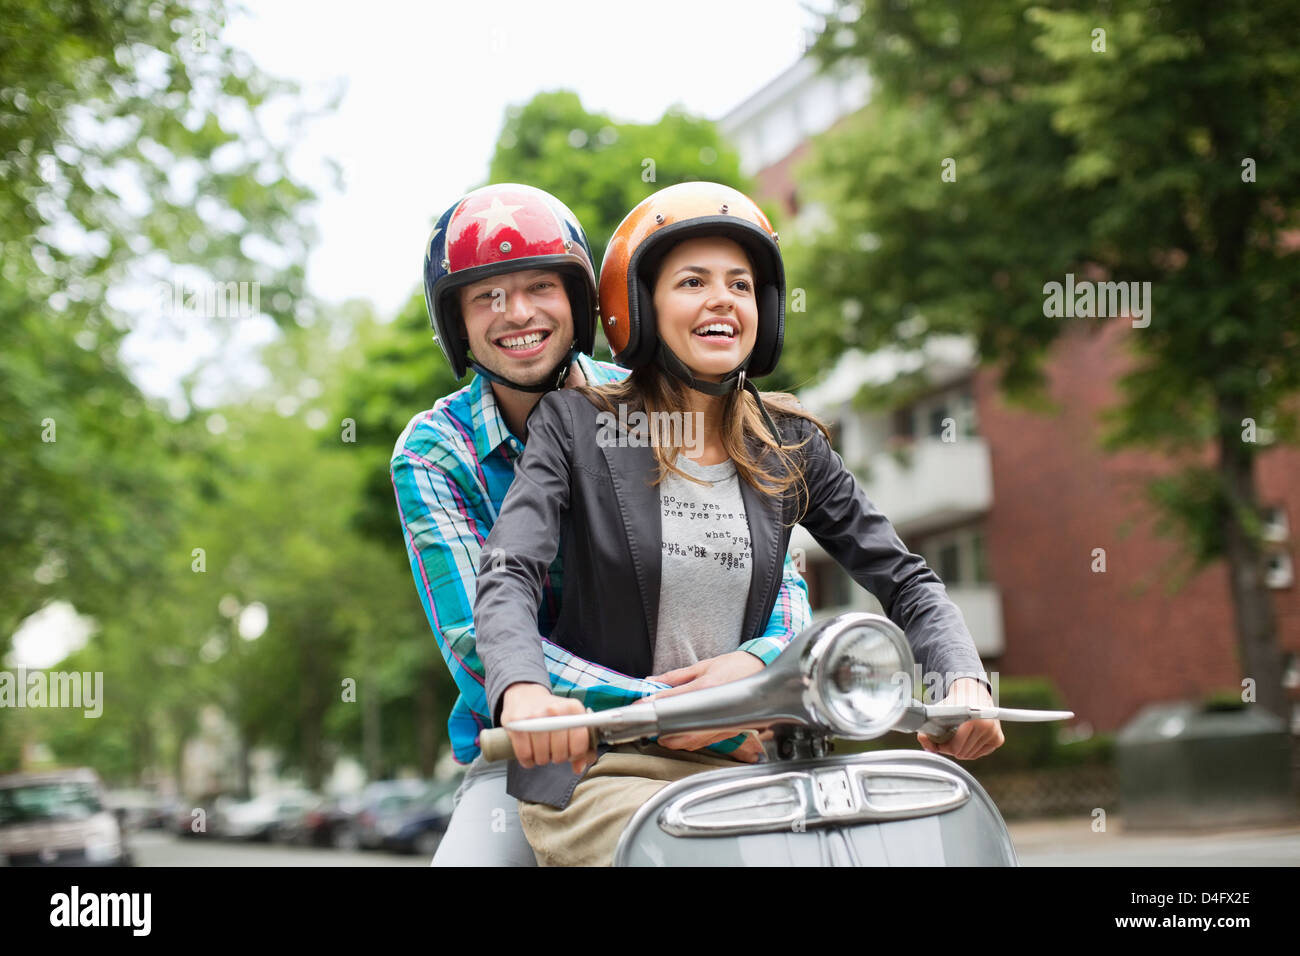 Couple riding scooter together on city street Banque D'Images